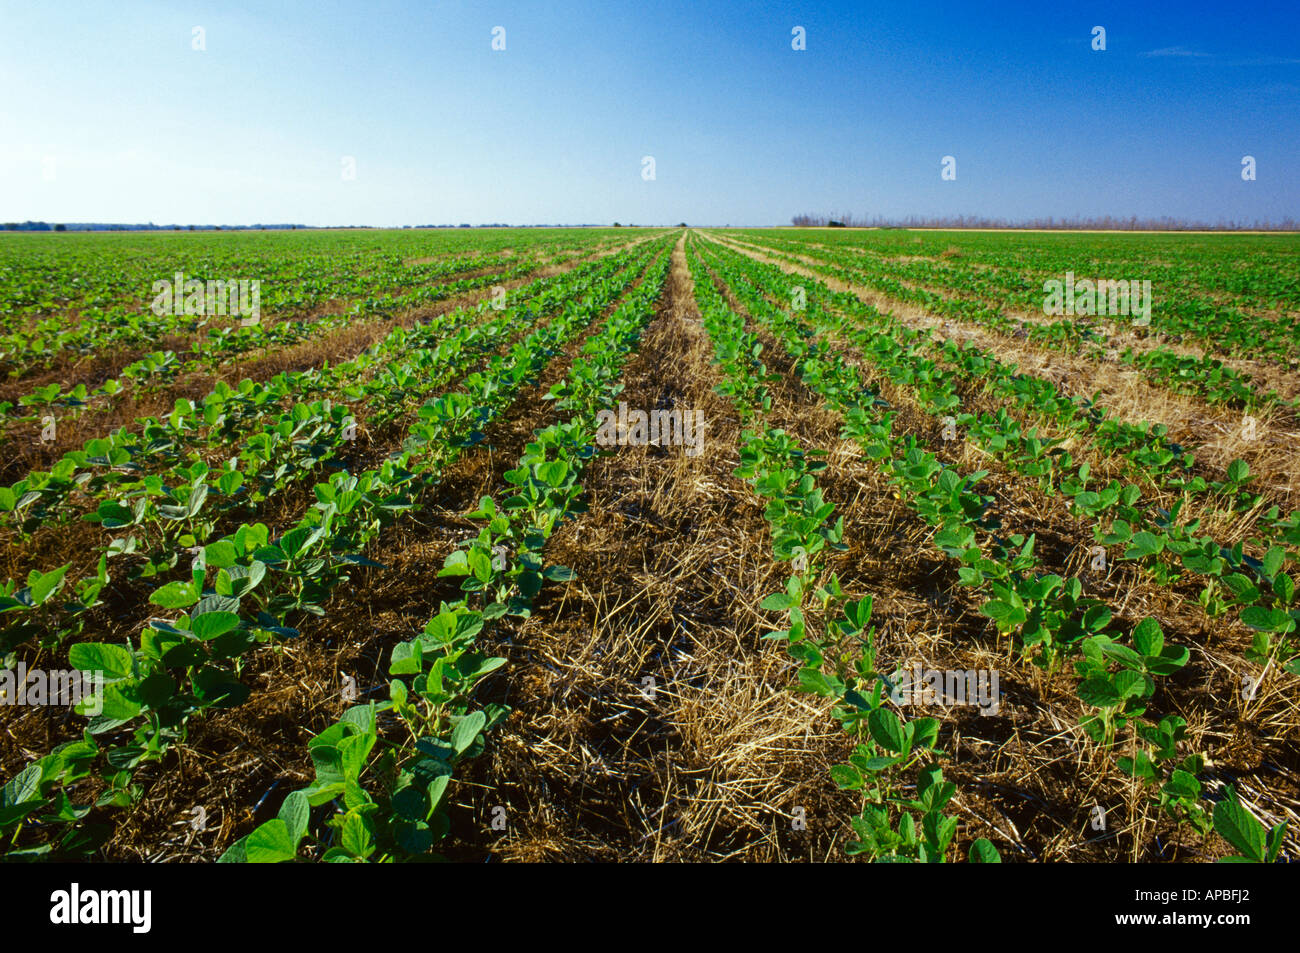 Field of early growth no-till soybean plants emerging in the residue of the preceding year's wheat crop / Arkansas, USA. Stock Photo